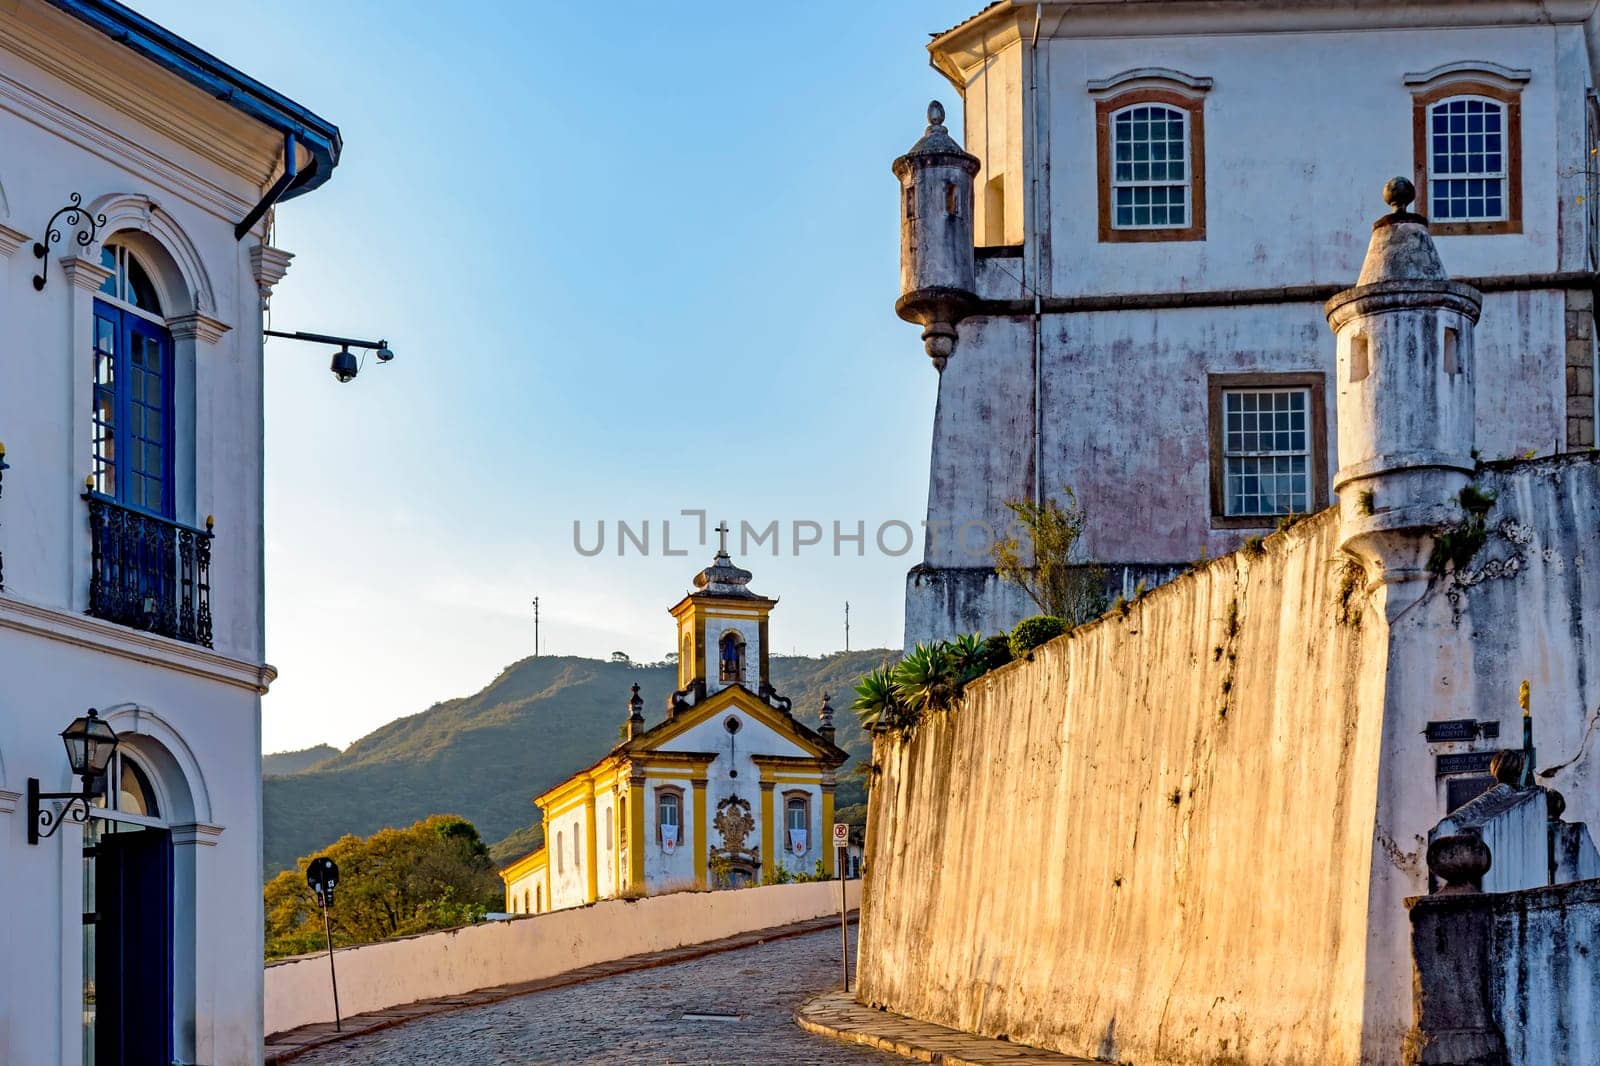 Arrival in the historic center of Ouro Preto by Fred_Pinheiro